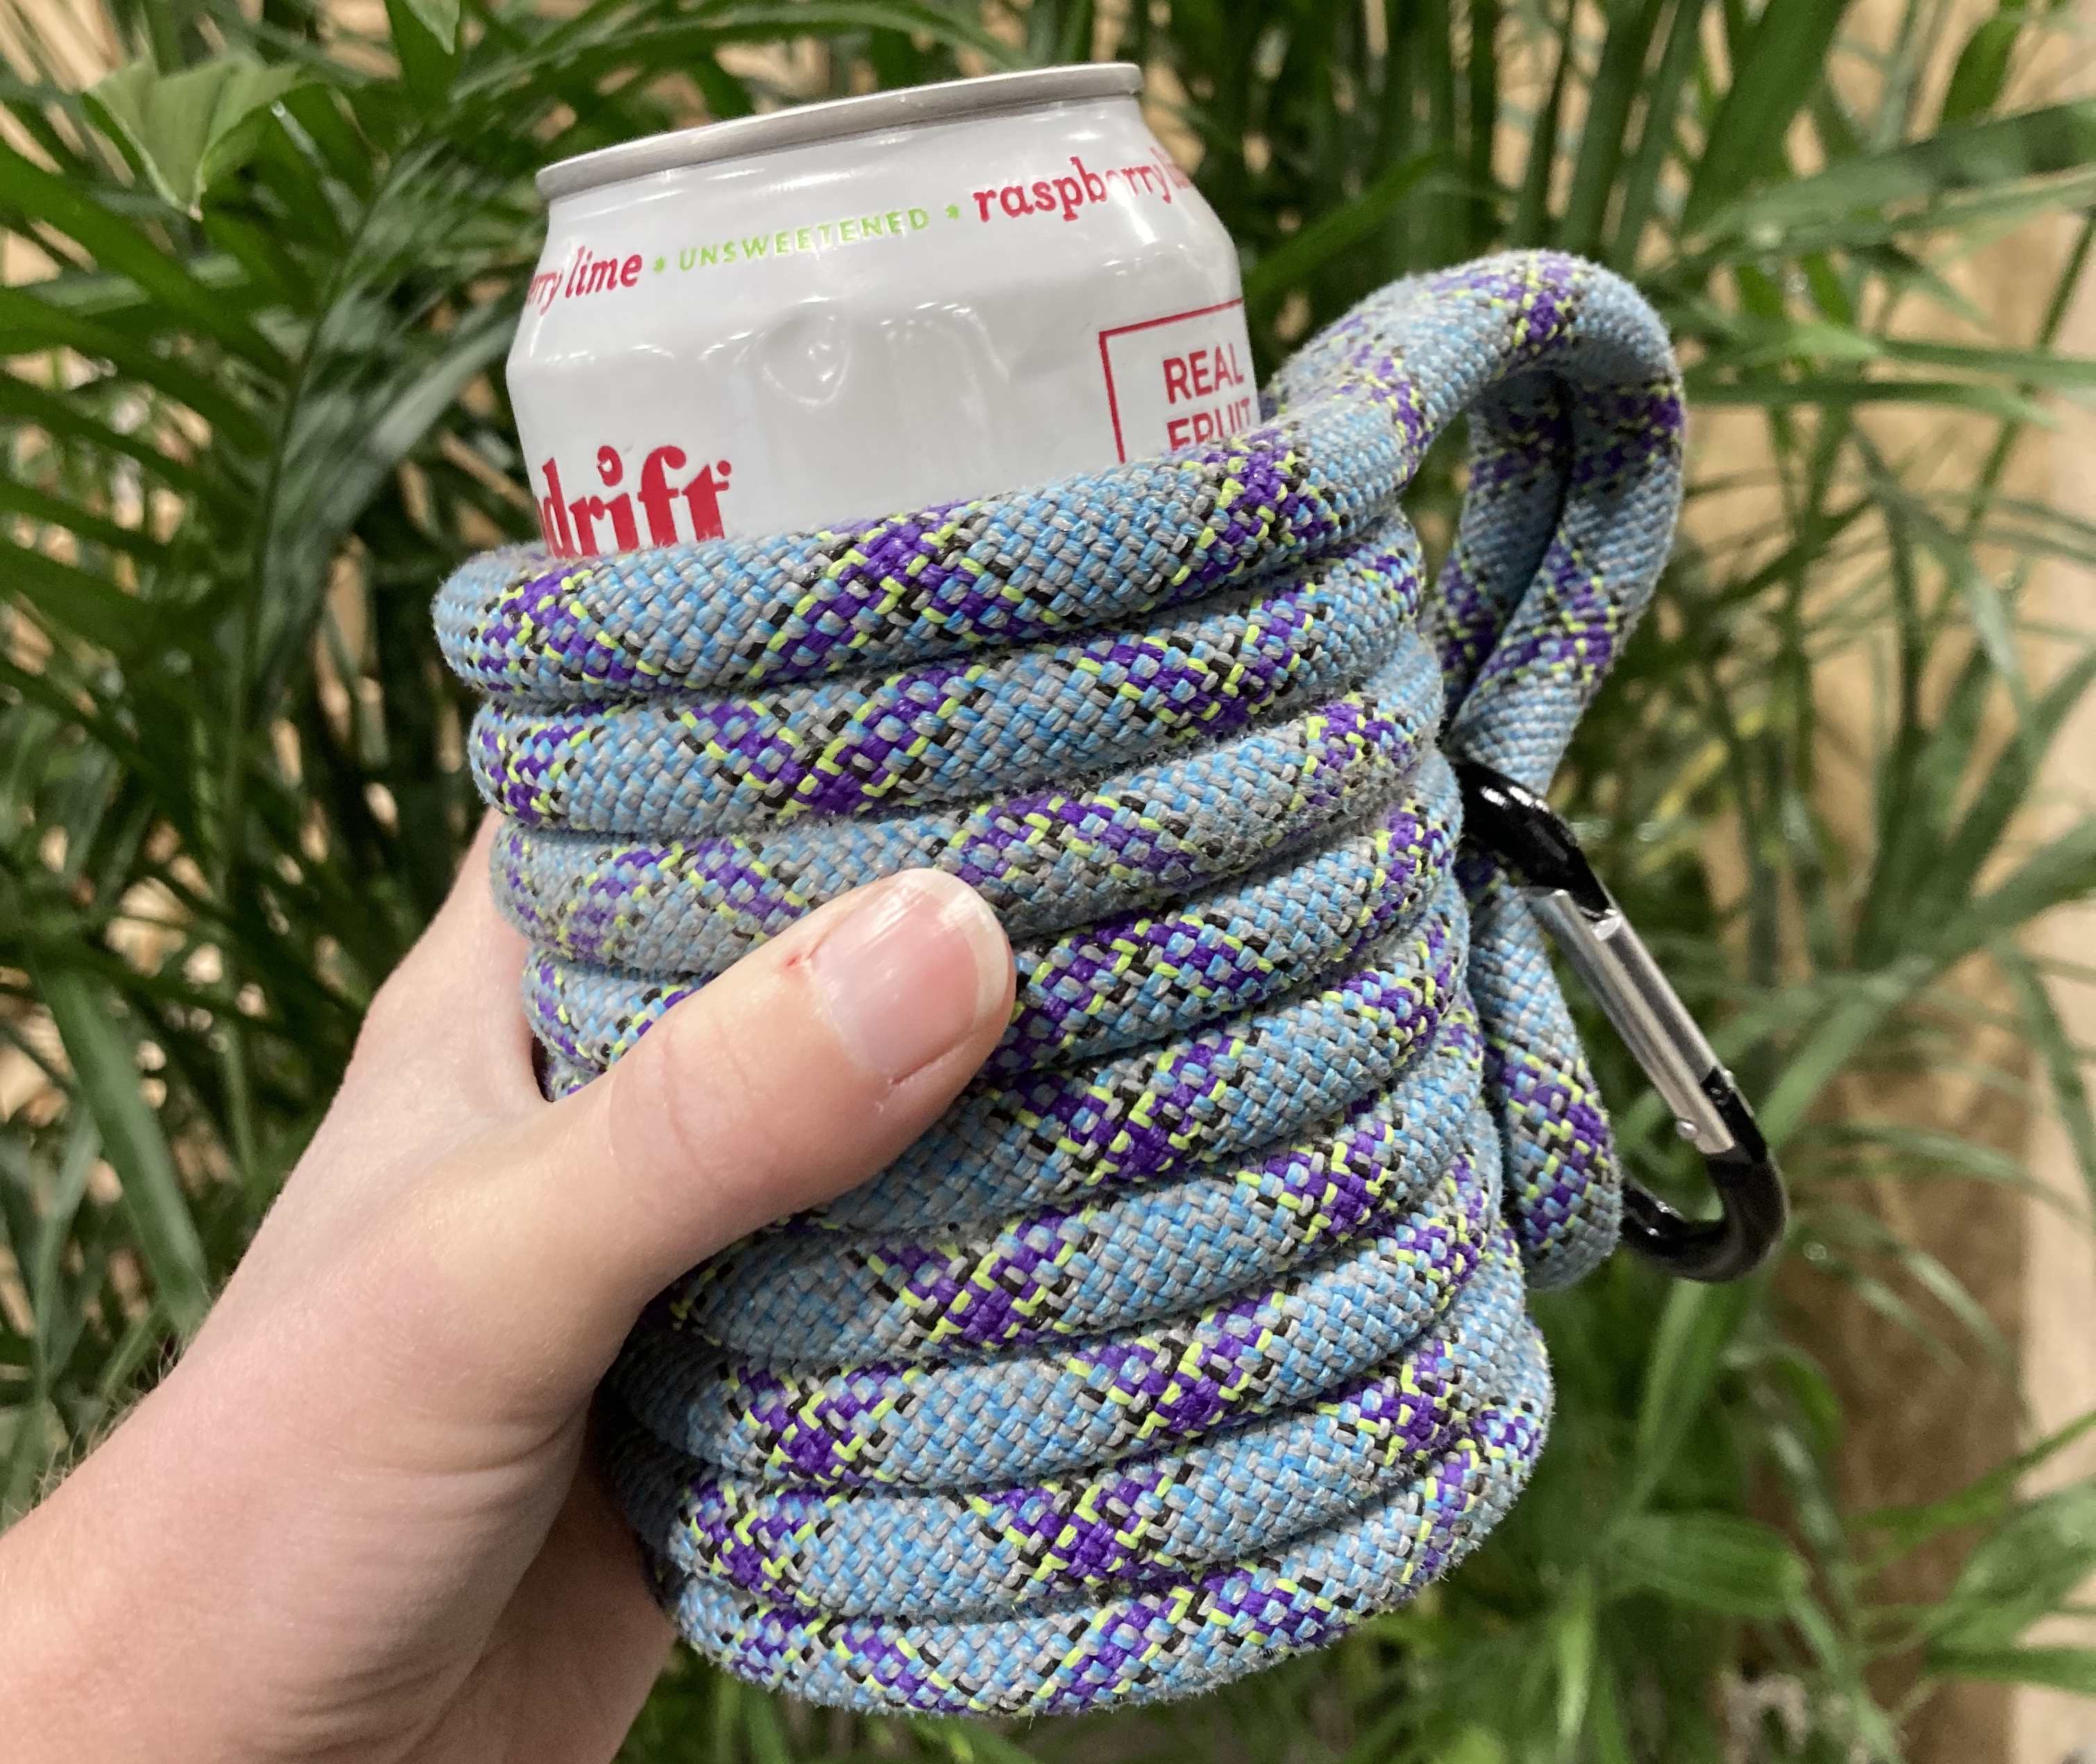 Cactus to Pine upcycled rope coozie